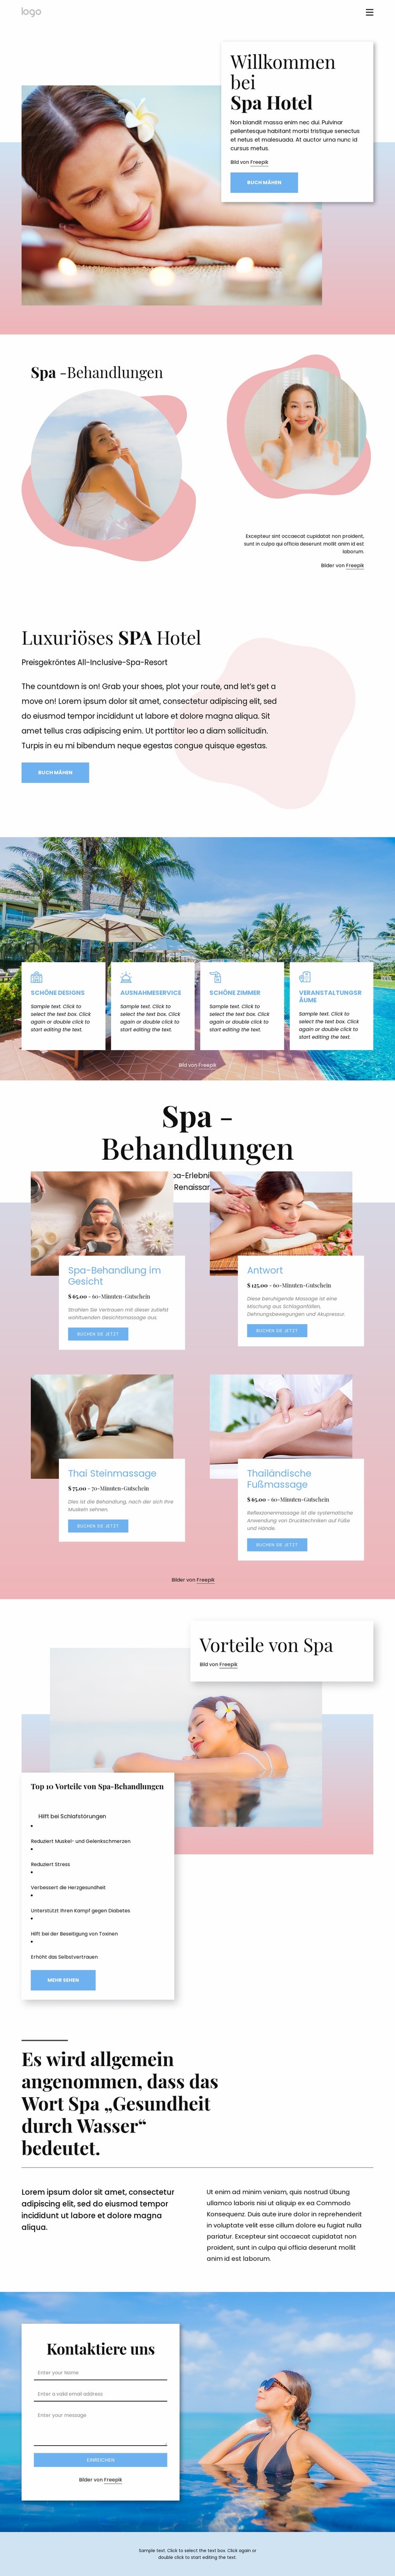 Spa Boutique Hotel Landing Page